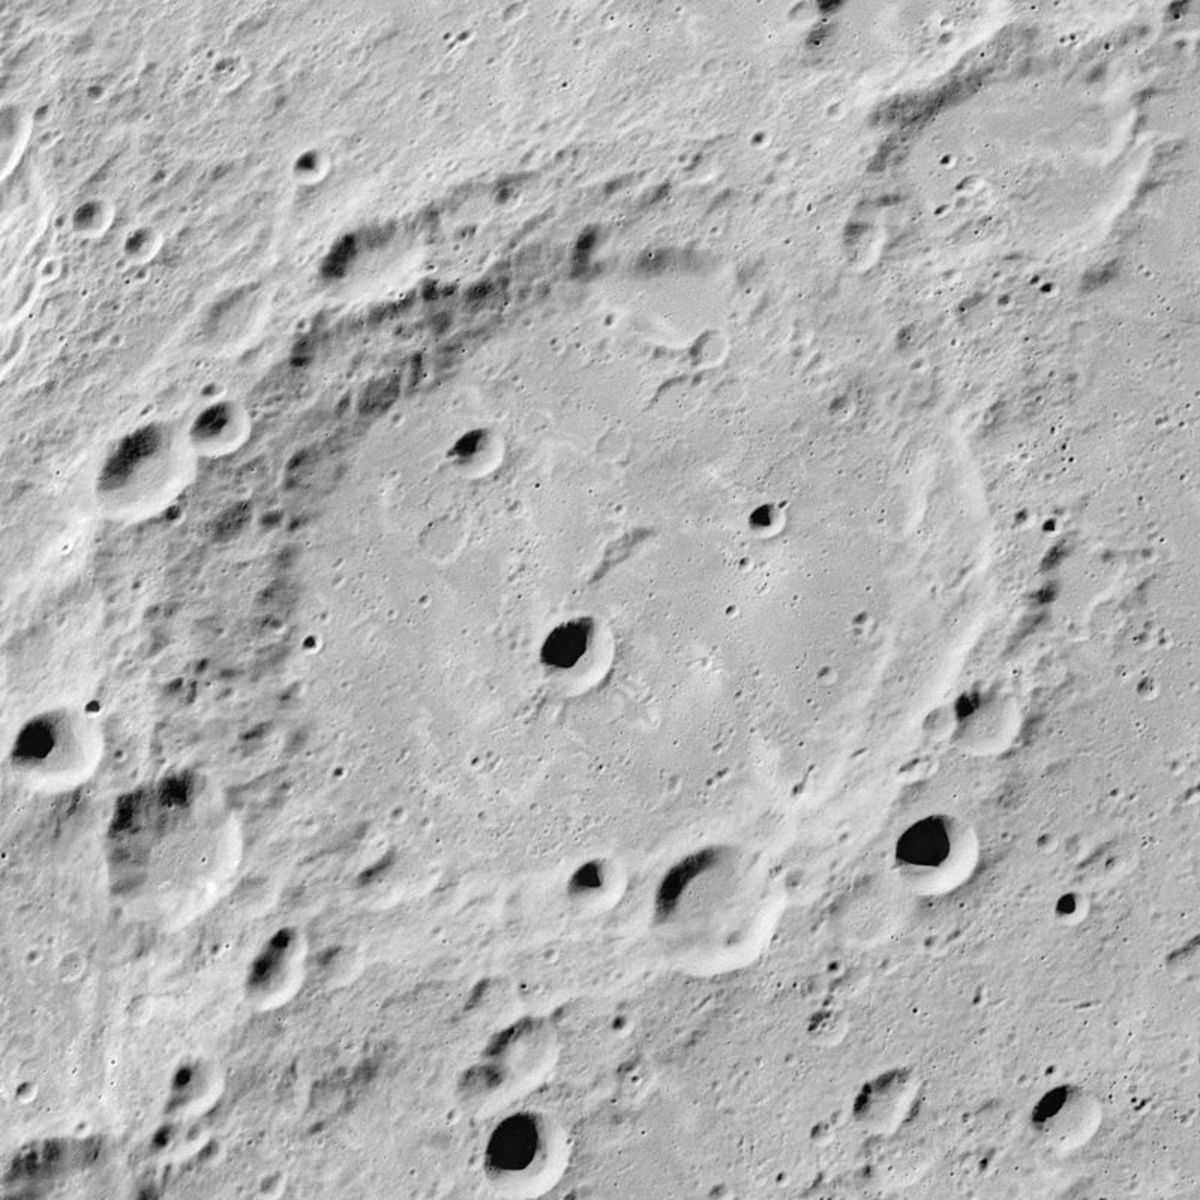 Fleming Crater located on the far side of the moon. The crater was named after Alexander (discoverer of penicillin) and Williamina Fleming.